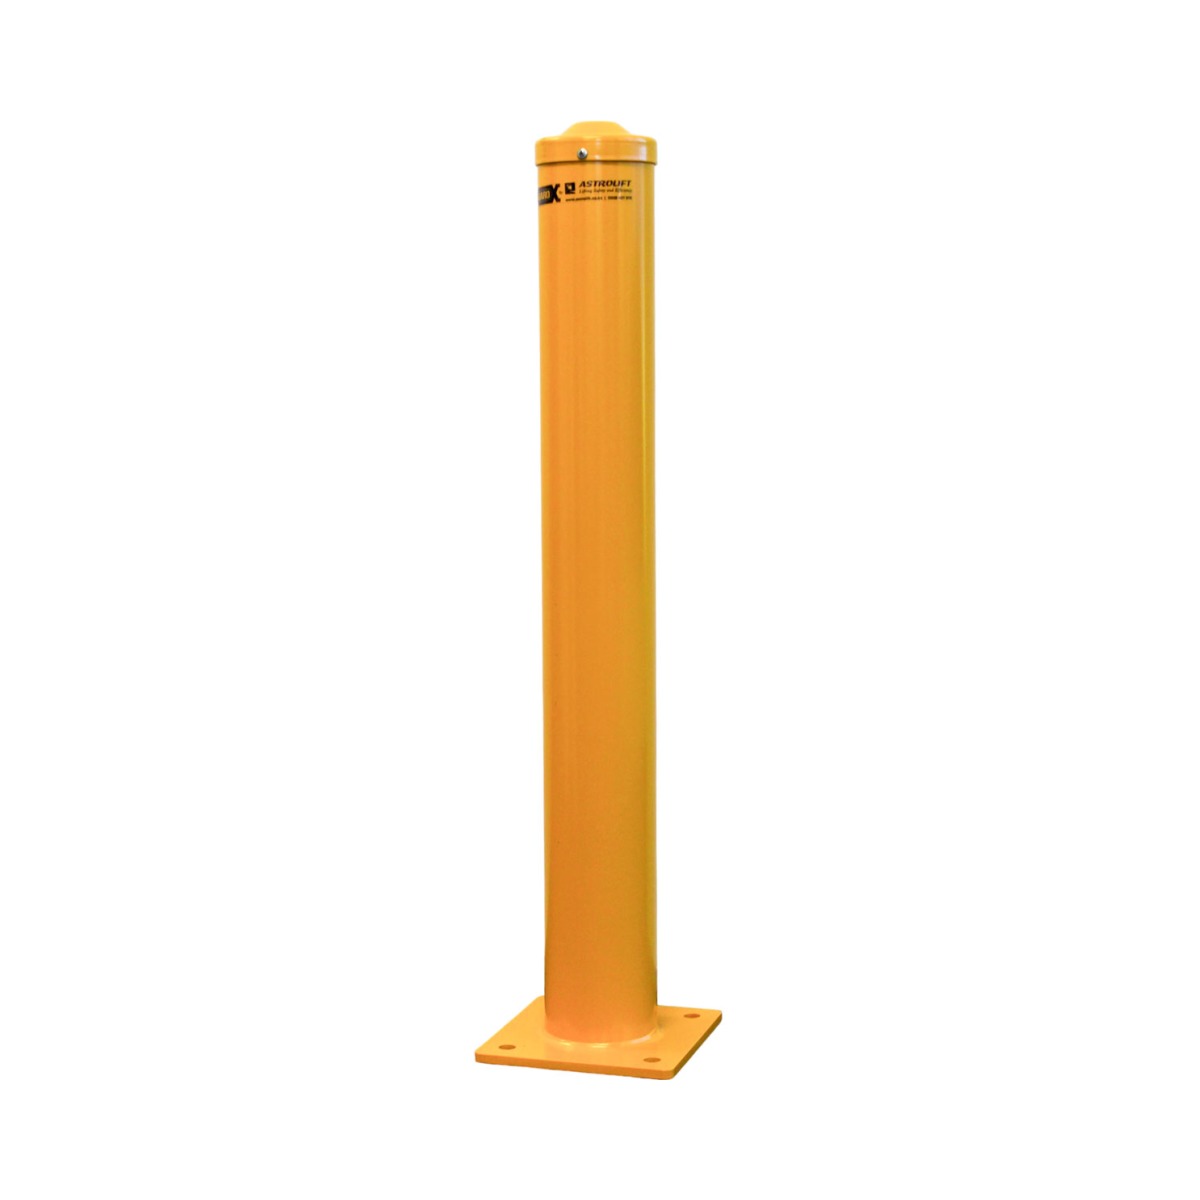 Buy Bolt-down Bollard (PC over Galv) in Bolt-down Bollards from GuardX available at Astrolift NZ